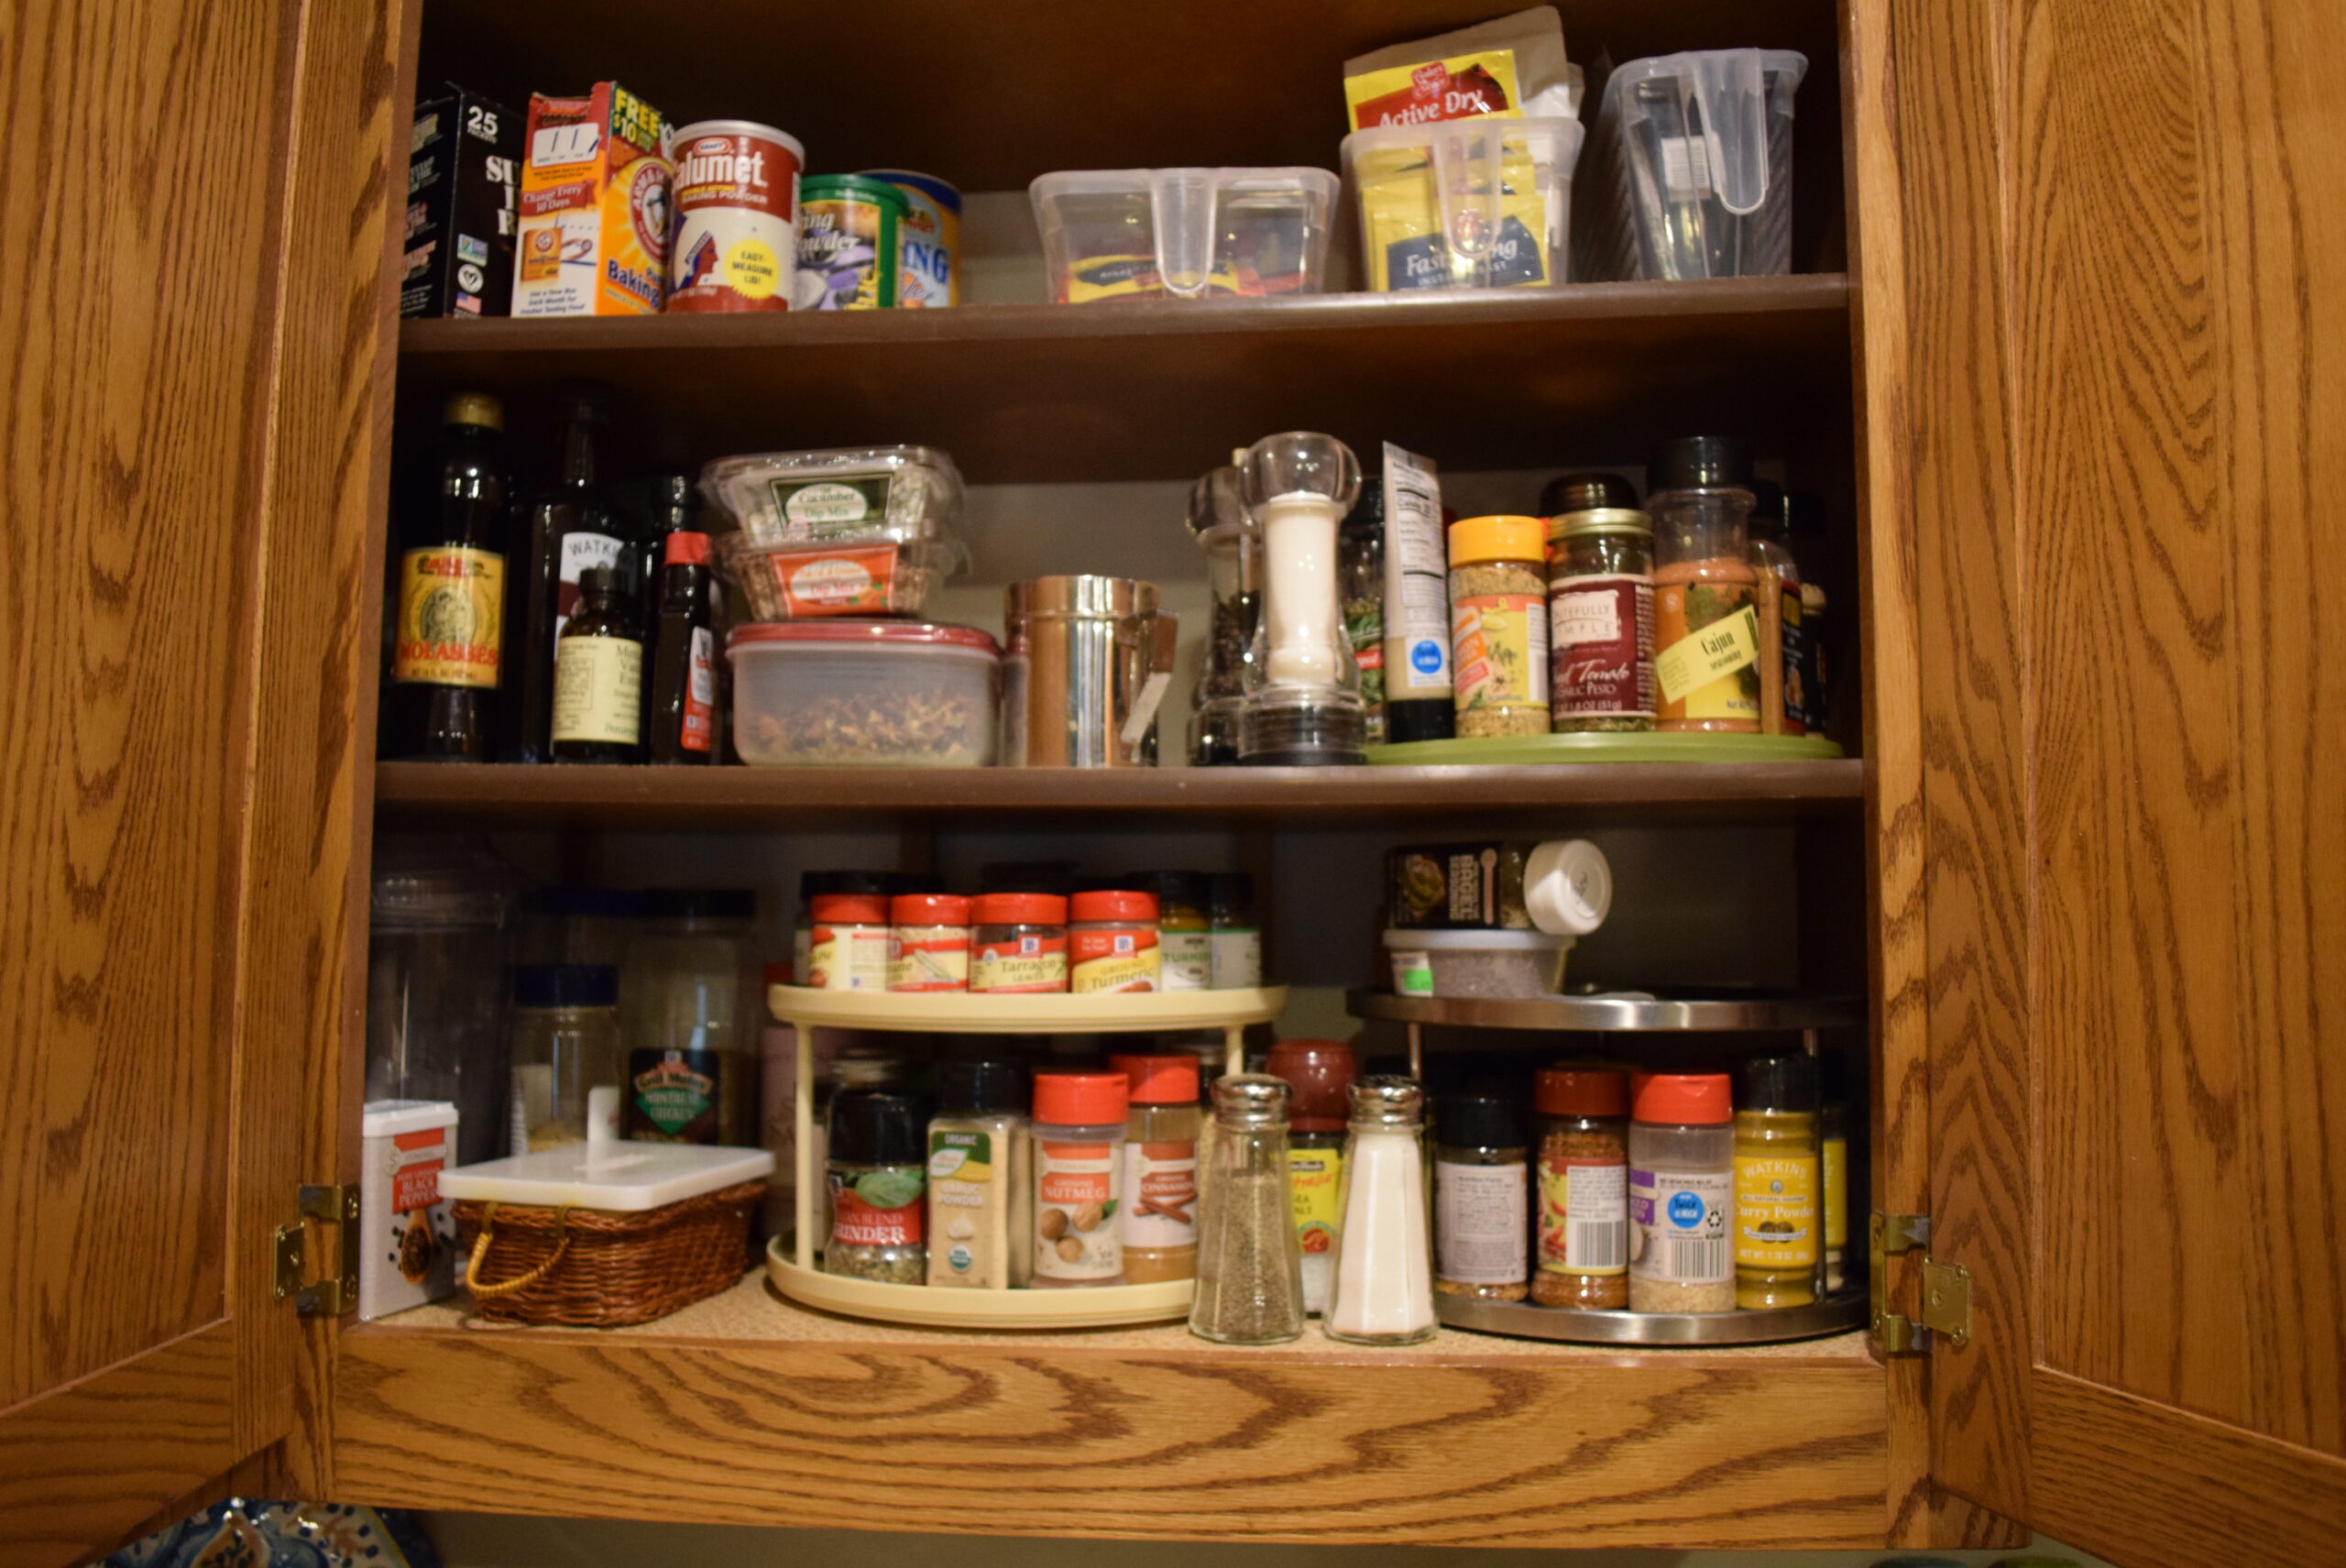 Spice Cabinet Contents Before Organization